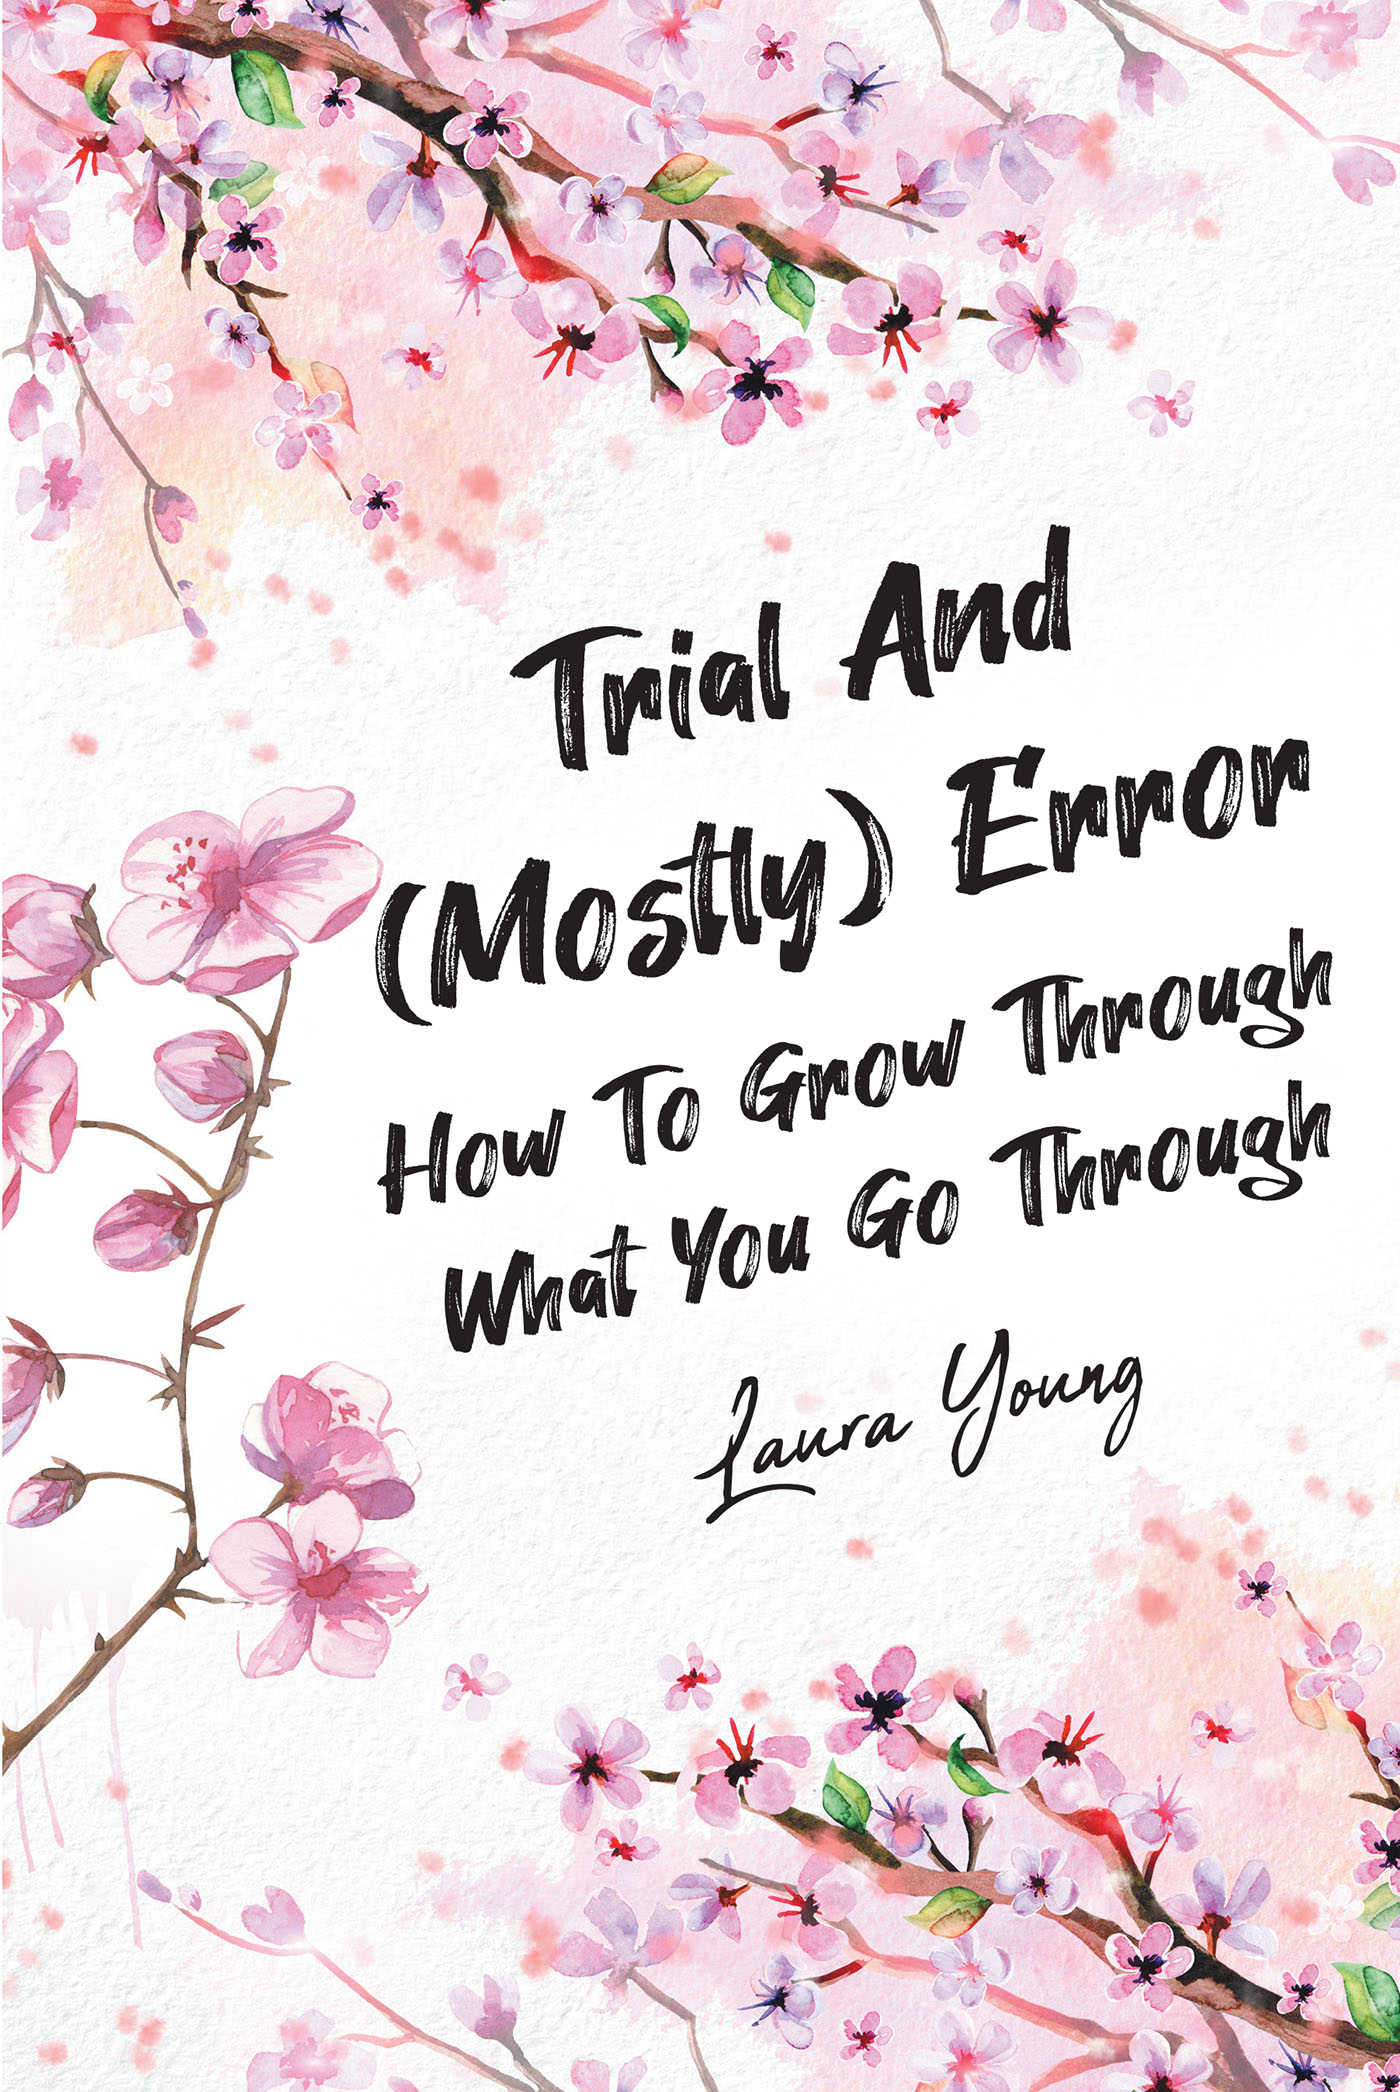 Author Laura Young’s New Book, "Trial And (Mostly) Error: How to Grow Through What You Go Through," is a Candid Compilation of Personal Essays